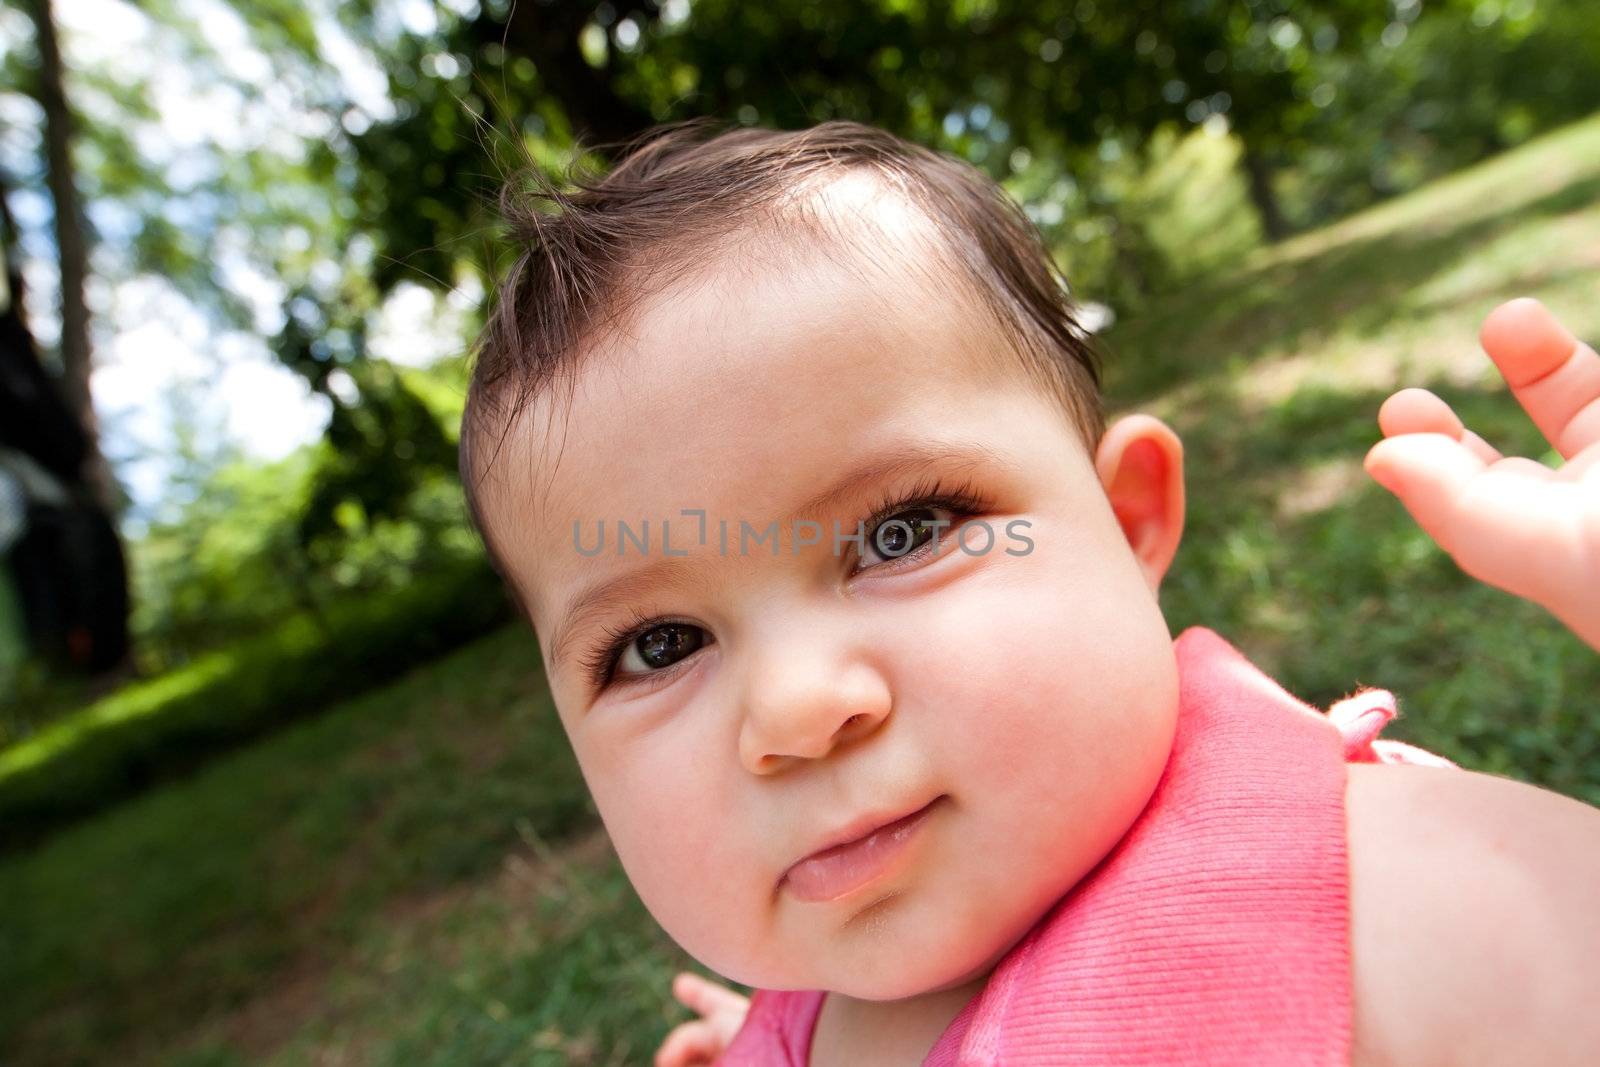 Caricature cute funny distorted baby face with big chubby cheeks of a Caucasian Hispanic infant girl with glossy eyes, in a park.